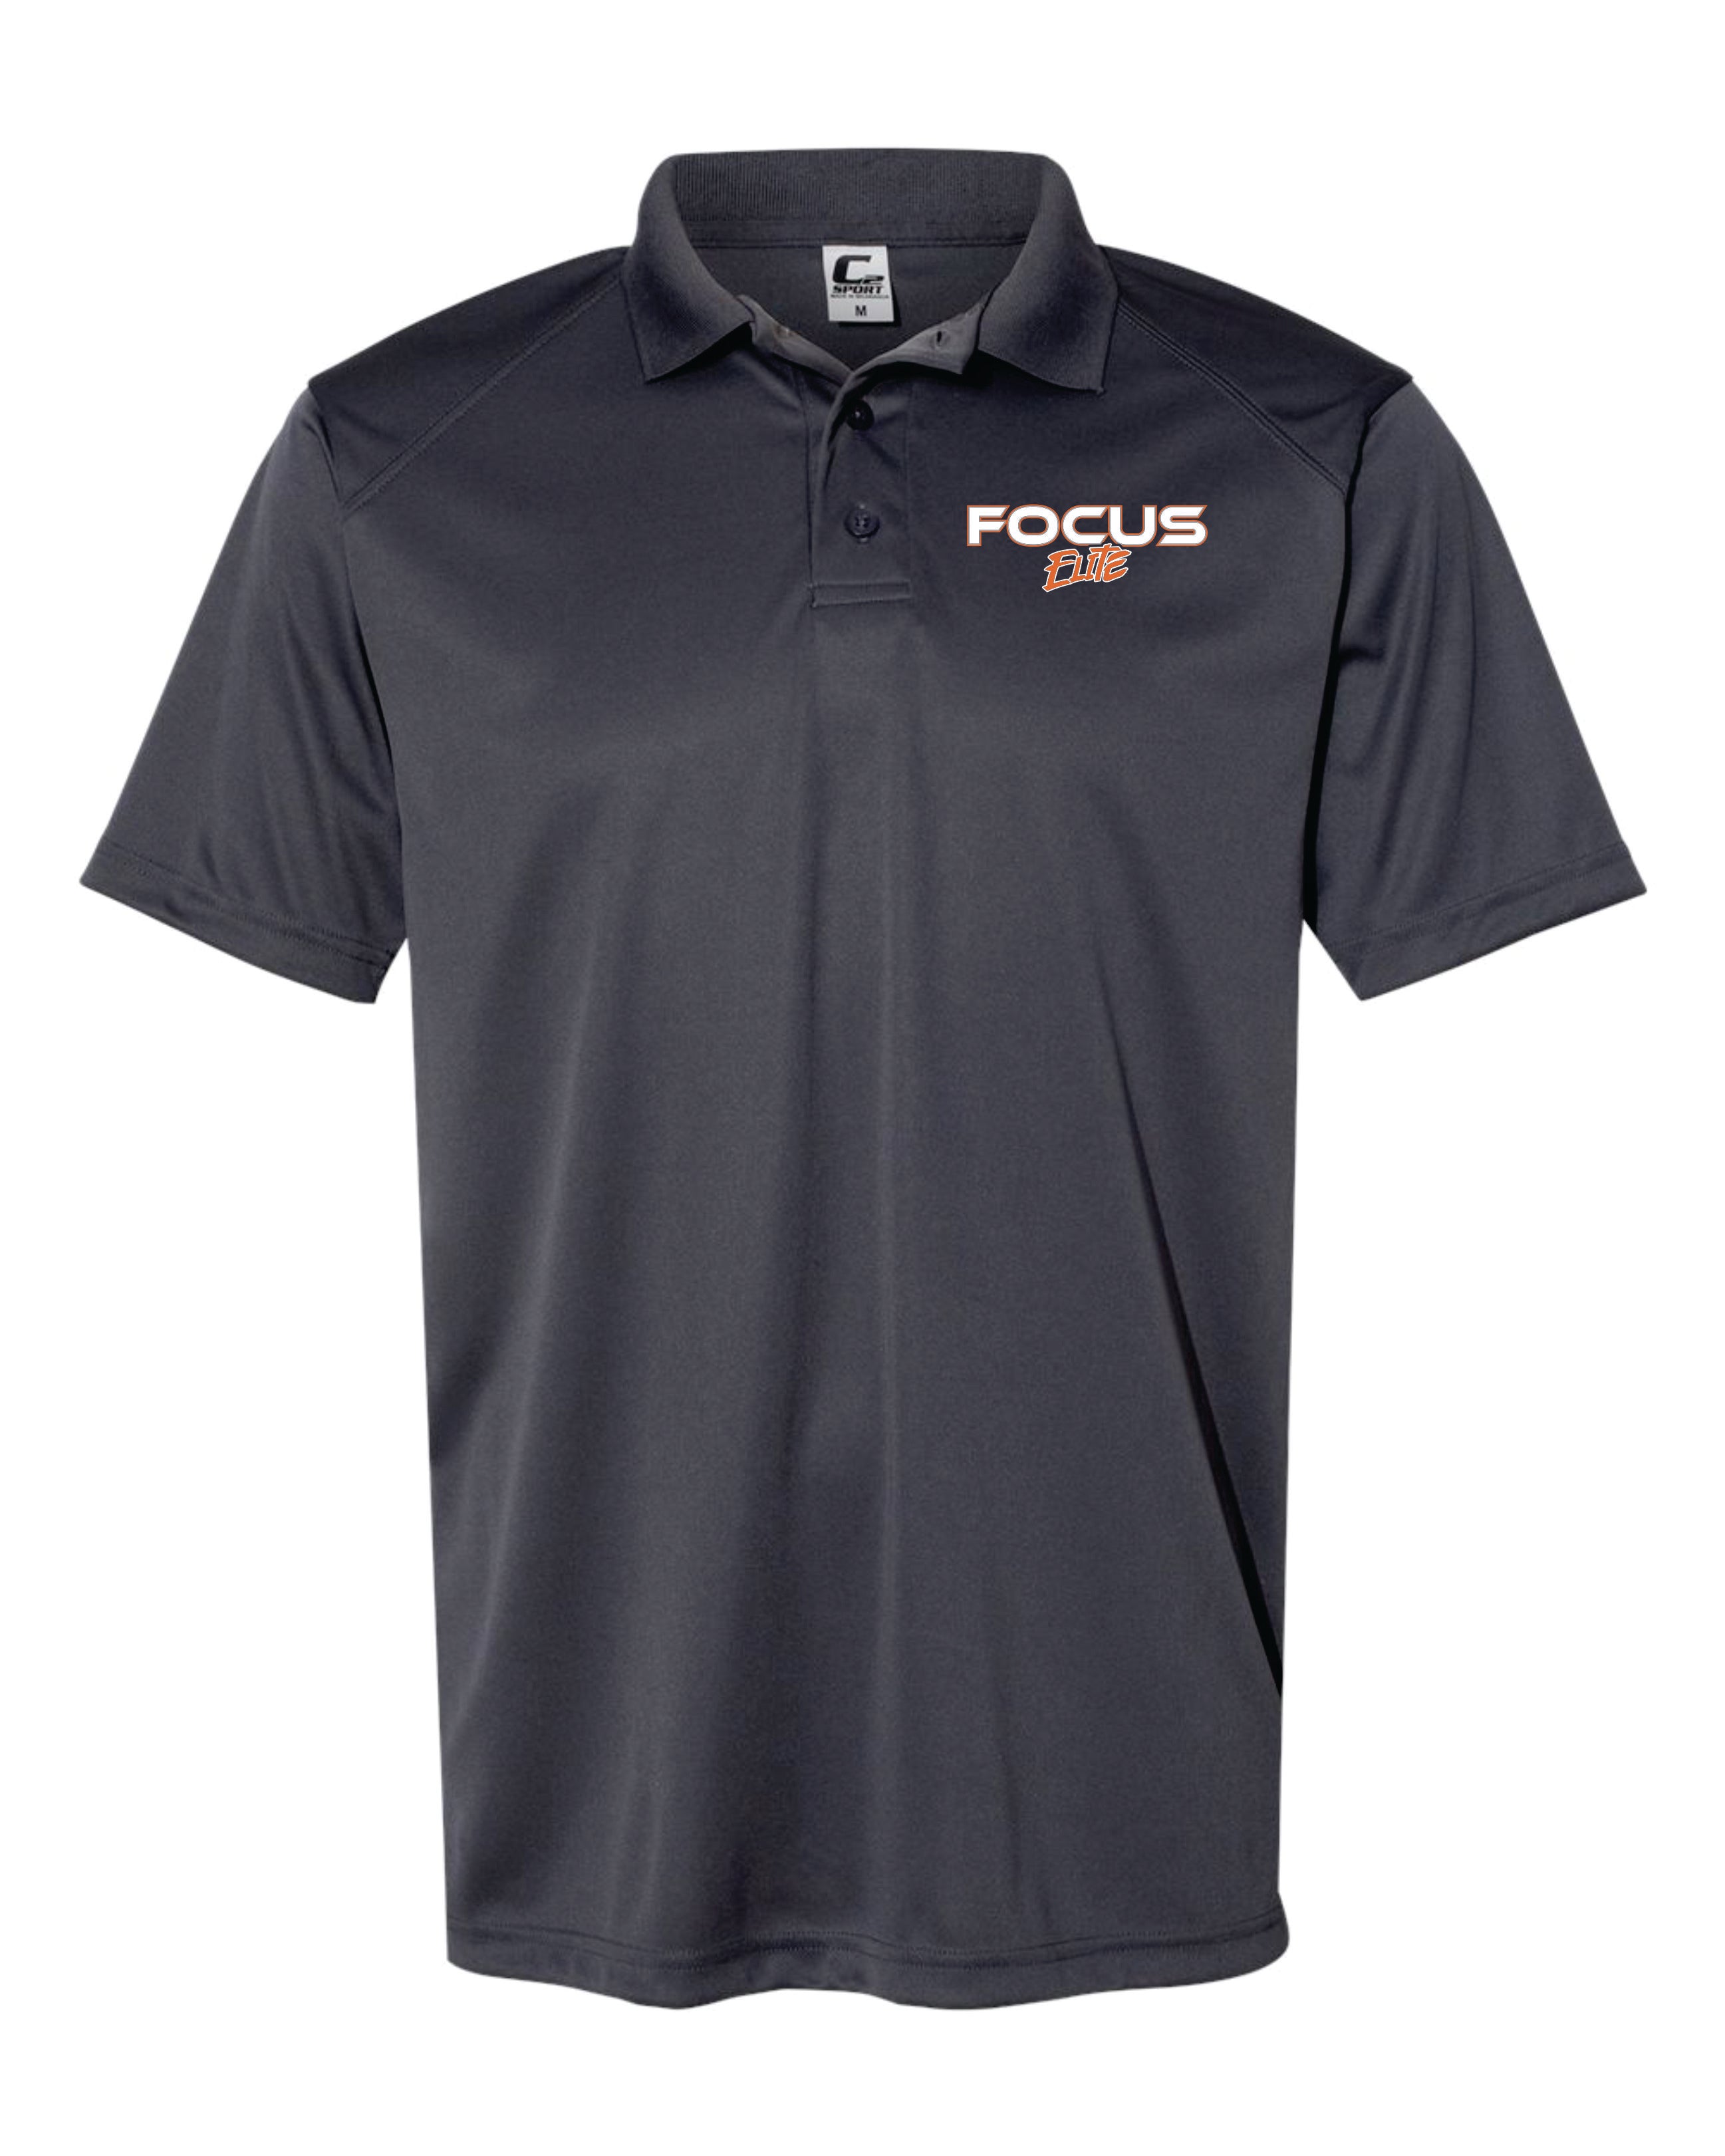 Focus Dri Fit Polo-YOUTH